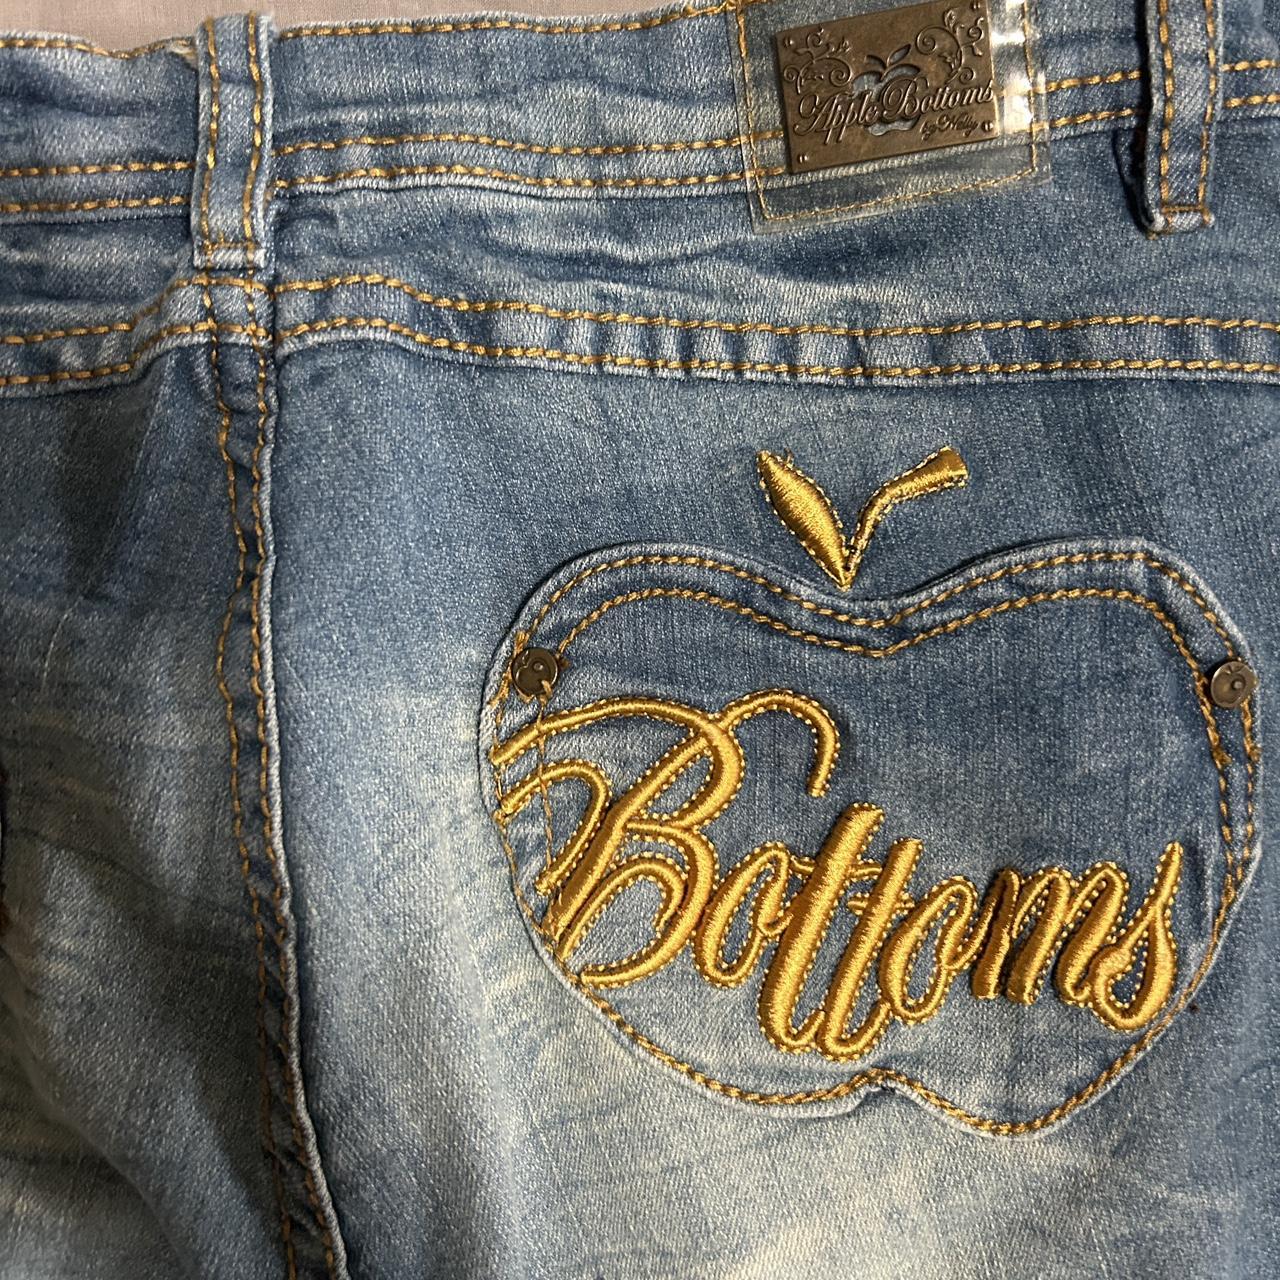 Apple Bottoms Women's Blue and Yellow Jeans (4)